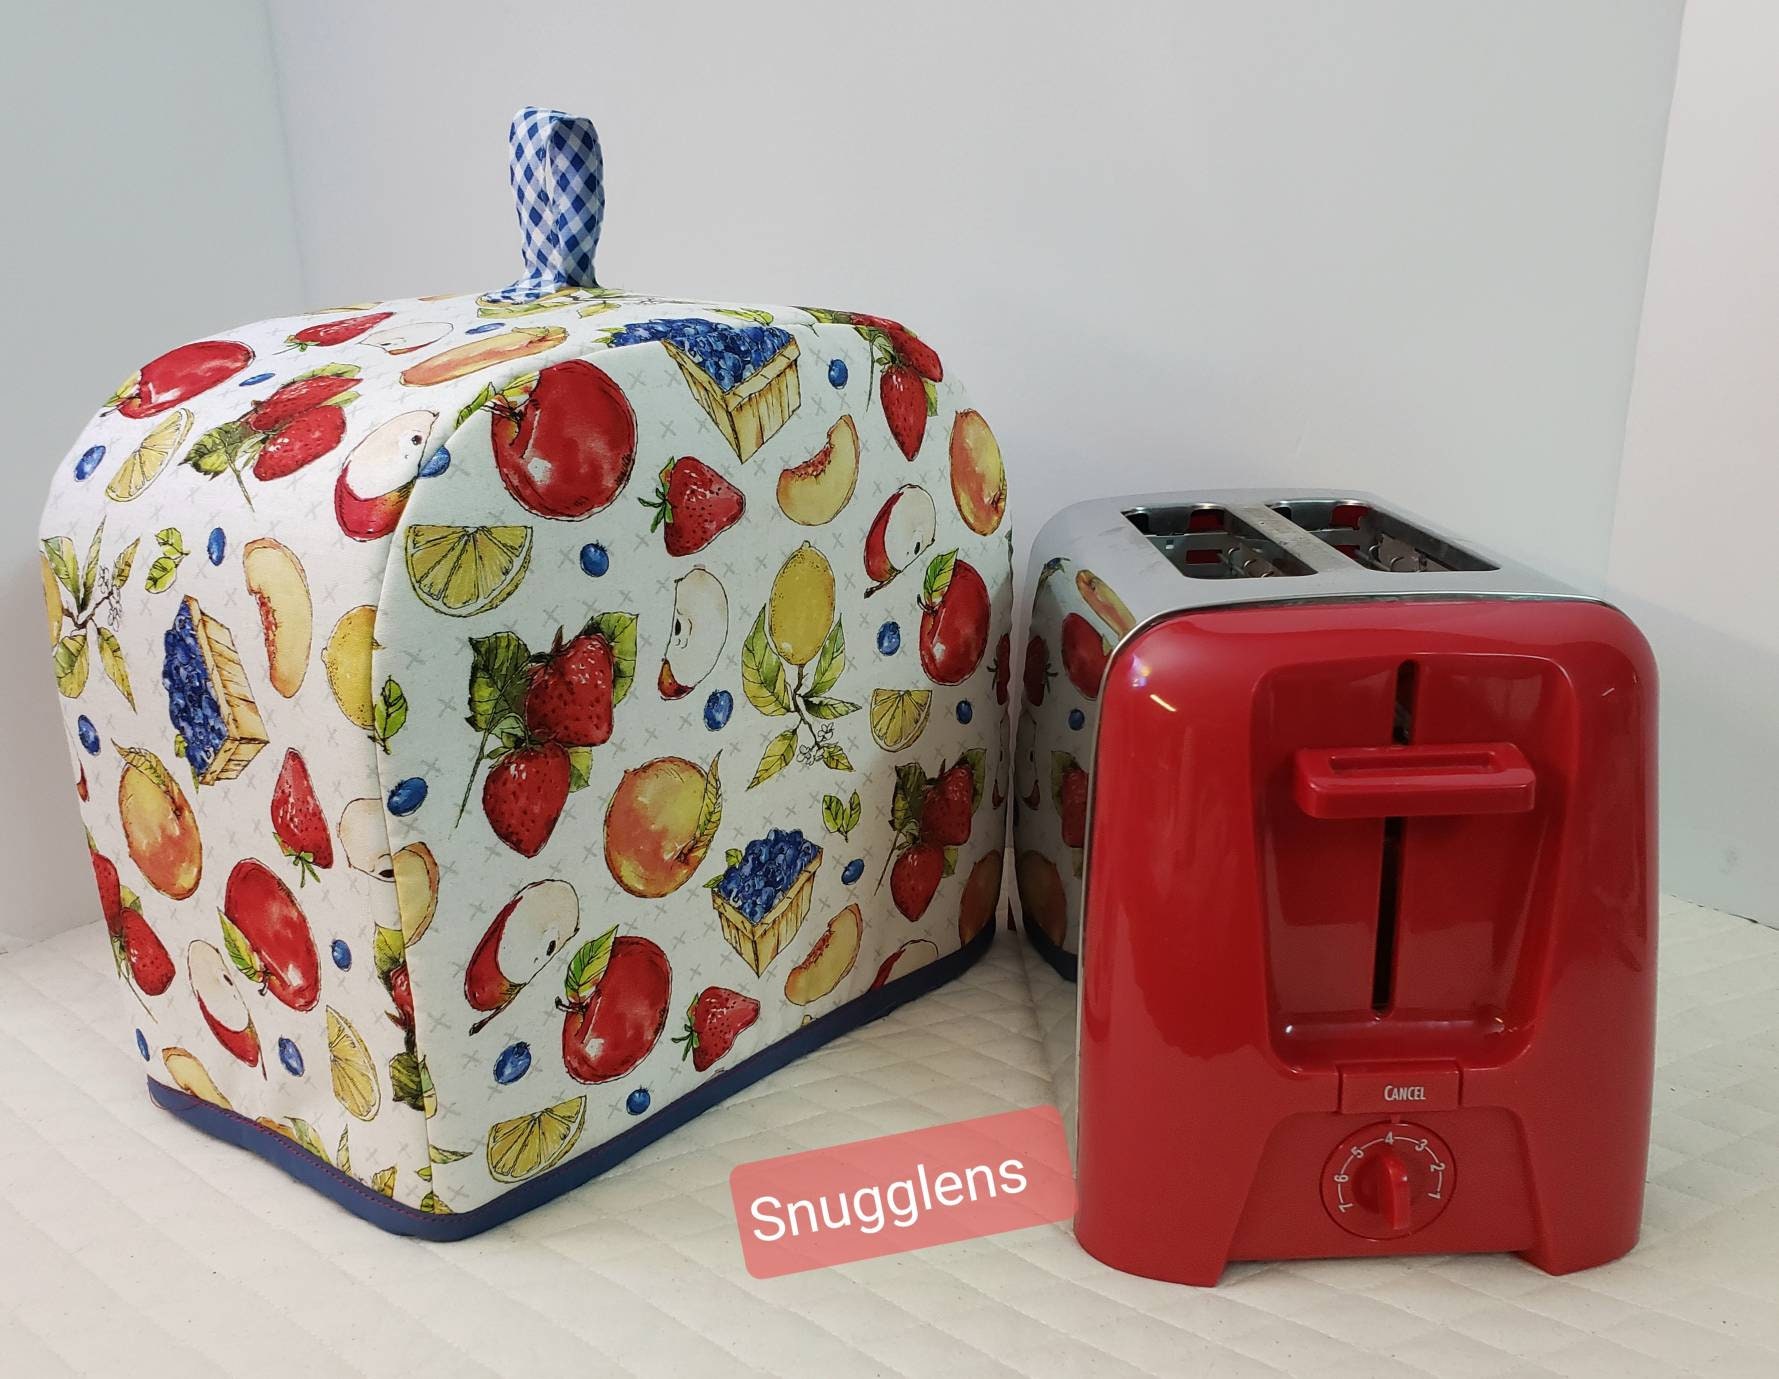 SNUGGLENS Toaster Cover, 2 Slice Toaster Cover, 4 Slice Toaster Cover